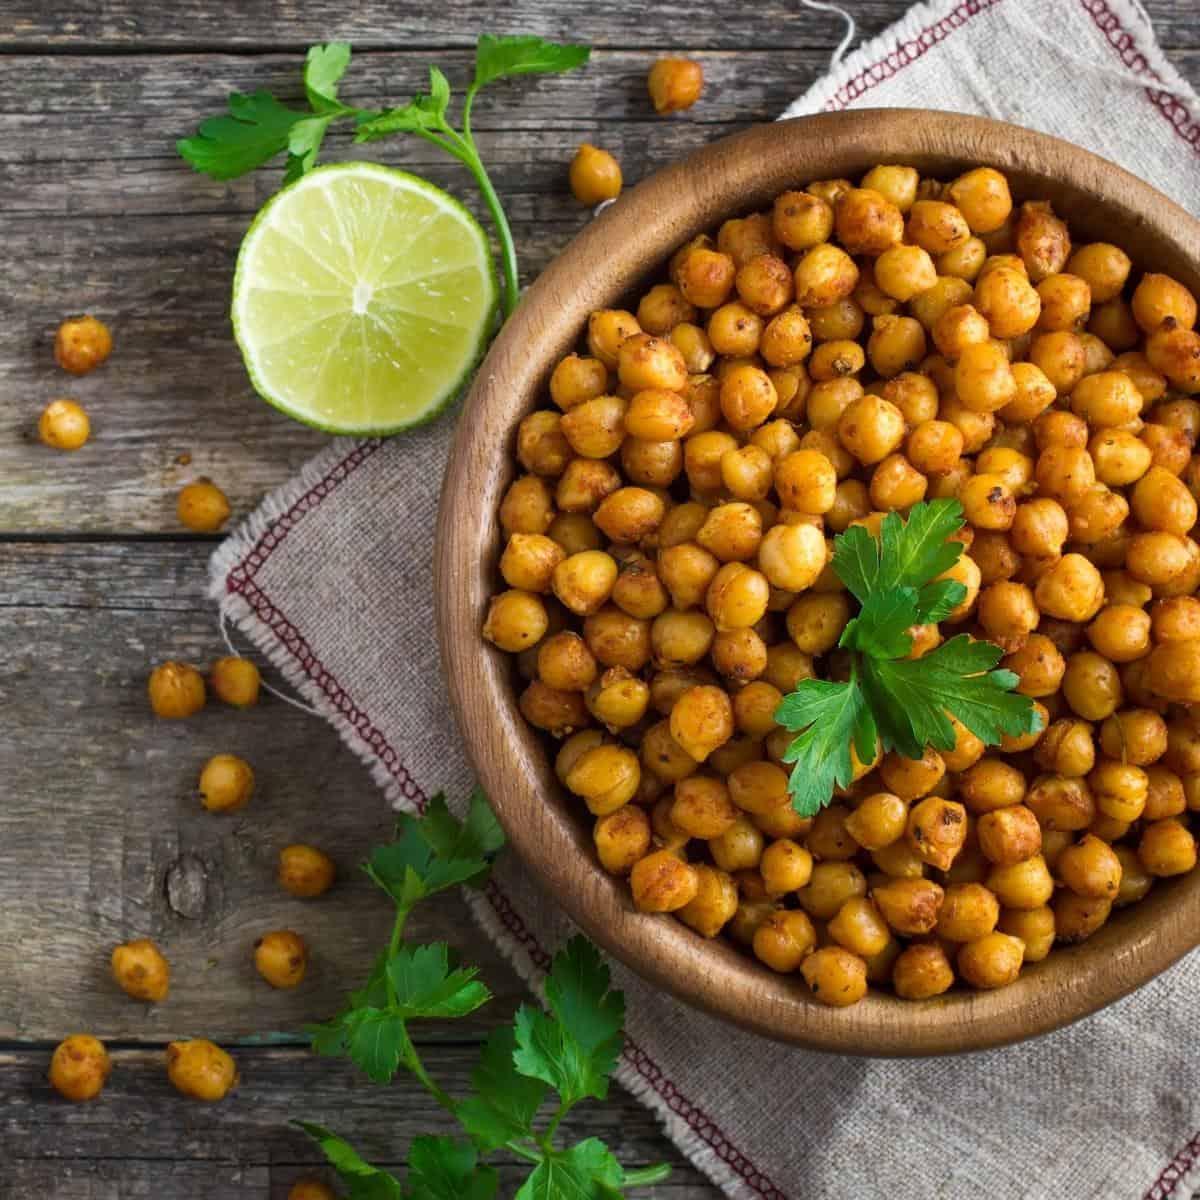 Amazing uses and recipes with chickpeas for weight loss